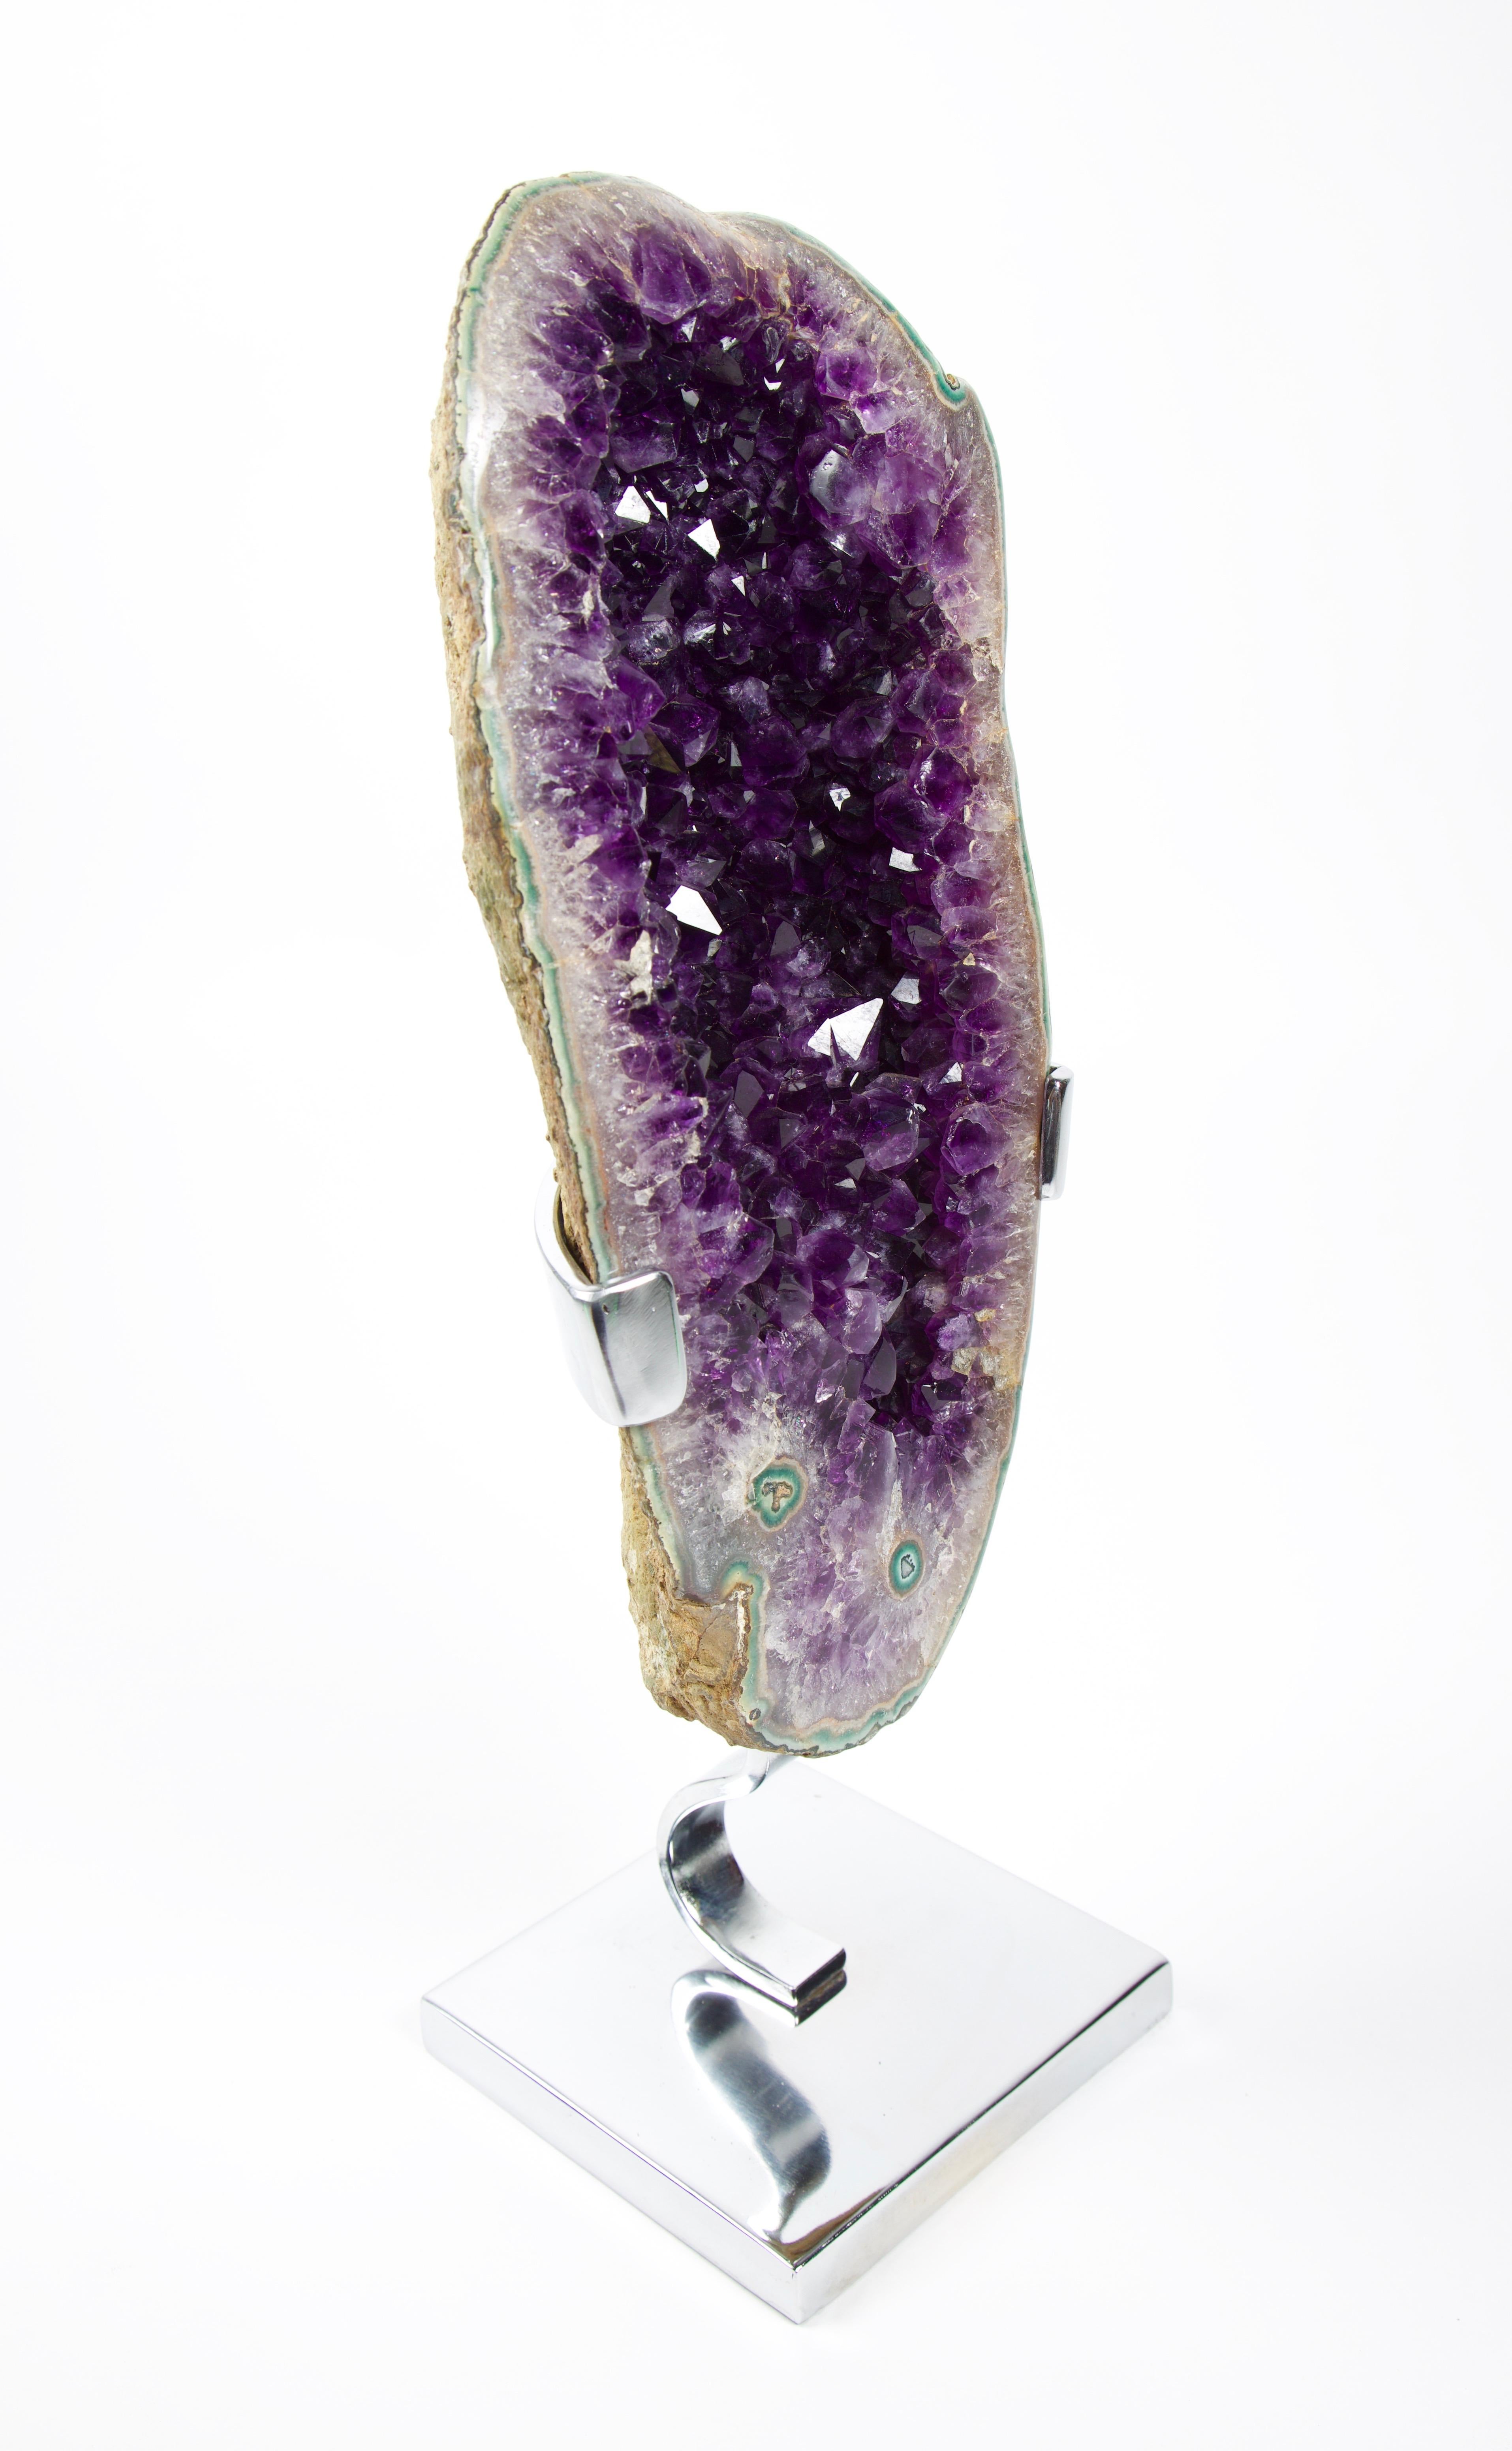 Gem grade Amethyst Geode sculpture
The amethyst geodes from Uruguay are mined from the same rock formation as their relatives just to the north across the border into southern Brazil and are igneous (volcanic) in origin. Uruguay amethyst, however,